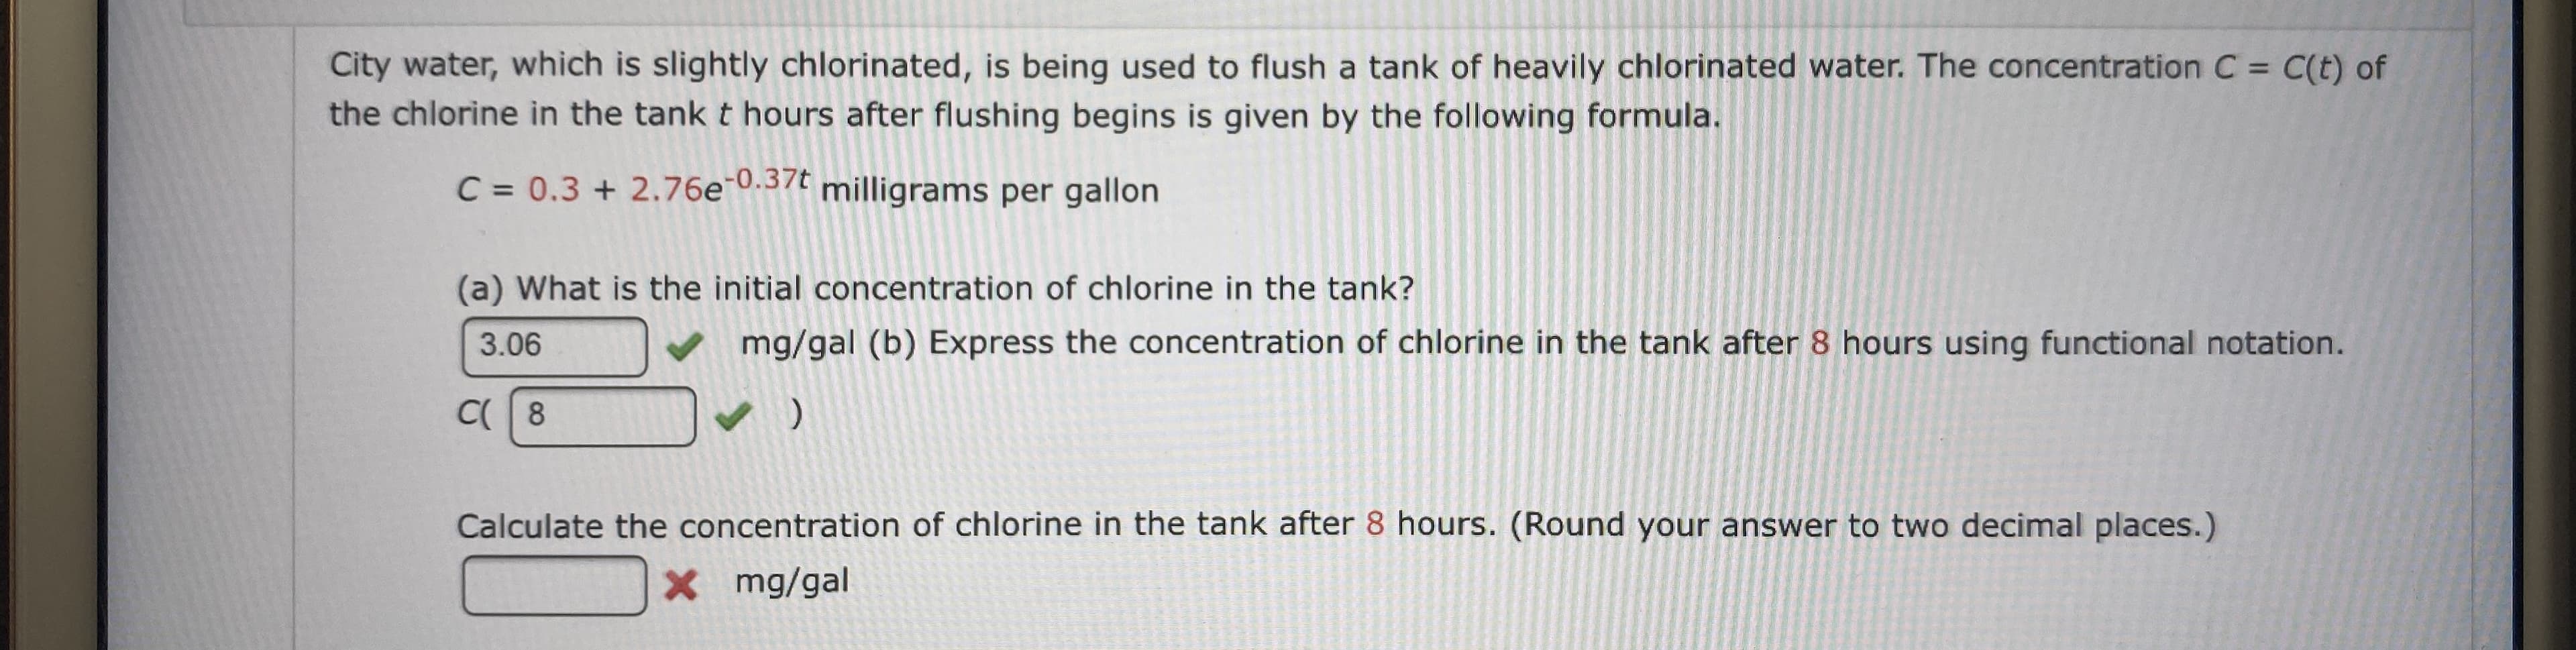 City water, which is slightly chlorinated, is being used to flush a tank of heavily chlorinated water. The concentration C = C(t) of
the chlorine in the tank t hours after flushing begins is given by the following formula.
C = 0.3 + 2.76e.37 milligrams per gallon
(a) What is the initial concentration of ch lorine in the tank?
mg/gal (b) Express the concentration of chlorine in the tank after 8 hours using functional notation.
3.06
C 8
)
Calculate the concentration of chlorine in the tank after 8 hours. (Round your answer to two decimal places.)
x mg/gal
